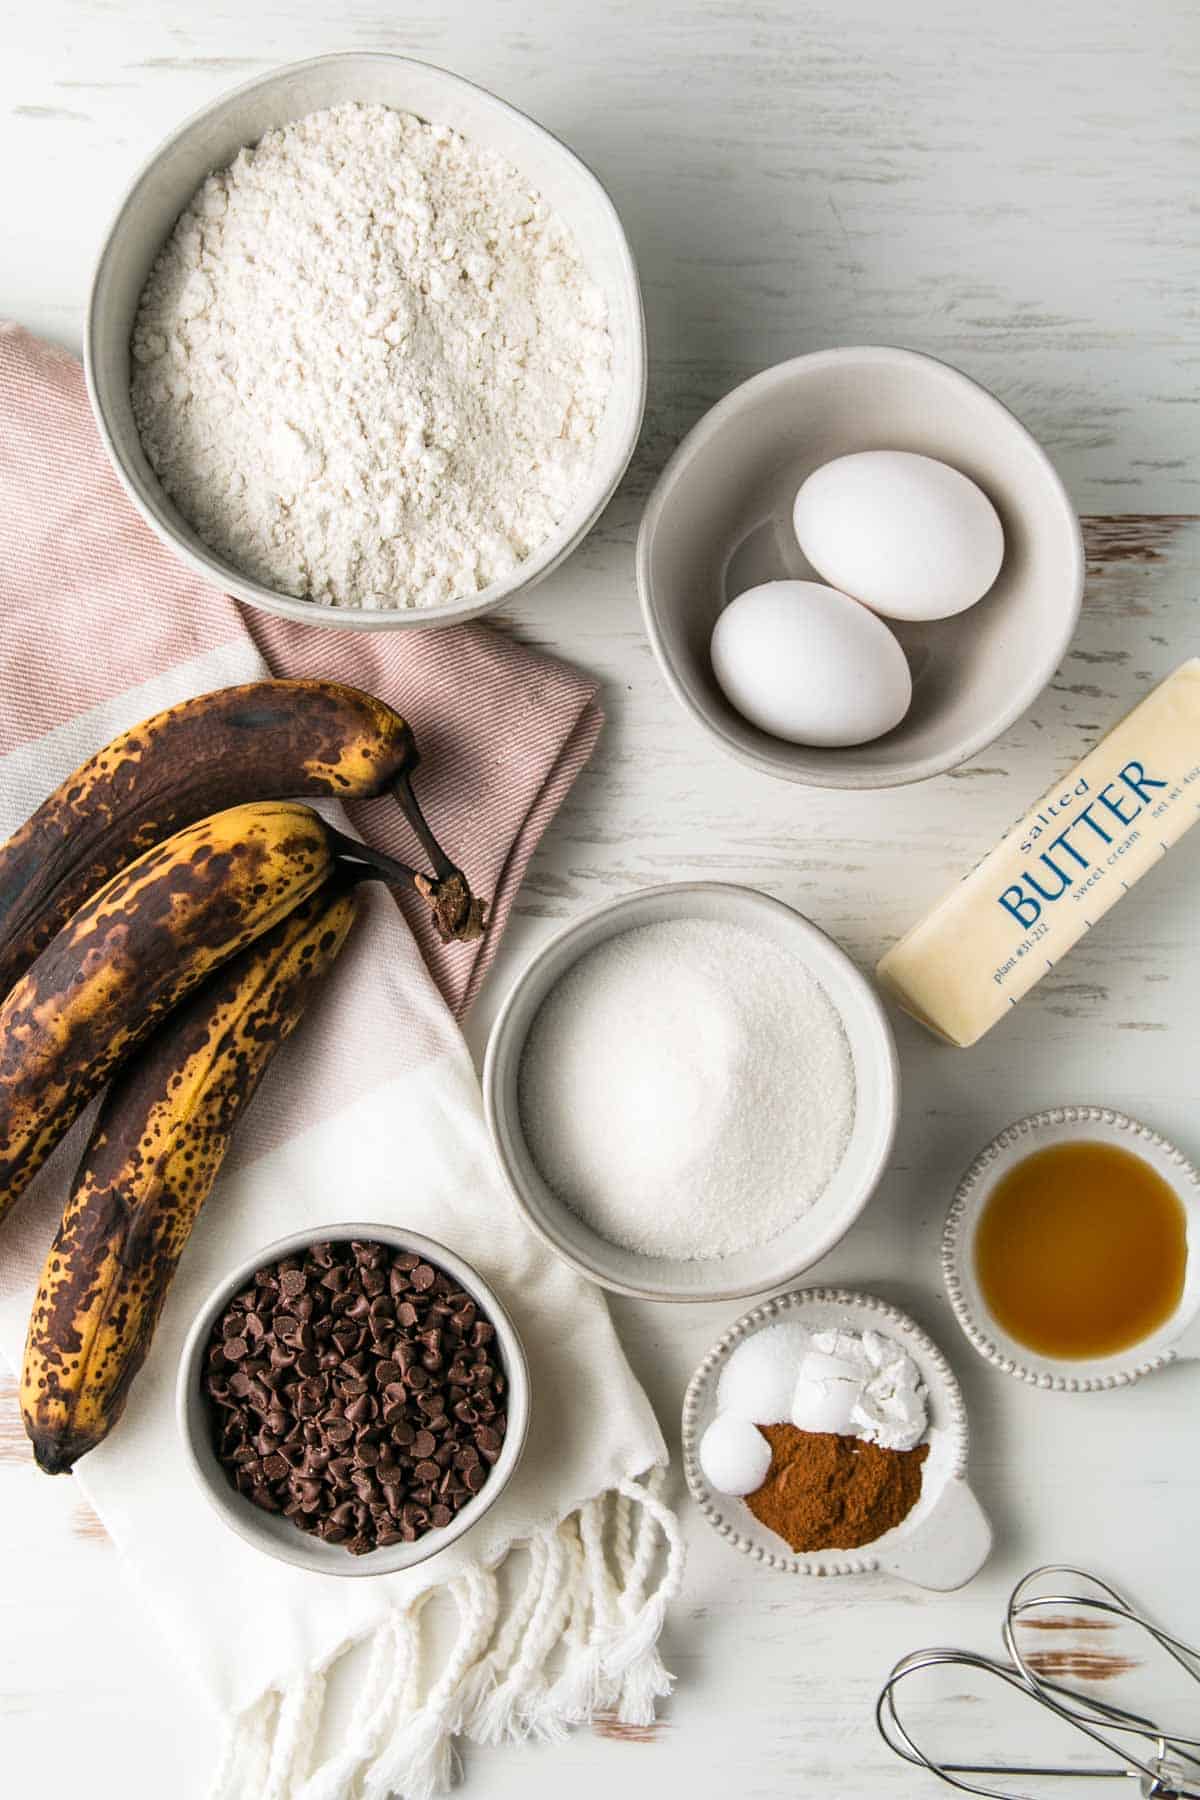 Ingredients for gluten-free chocolate chip banana muffins measured out in bowls next to three over-ripe bananas.